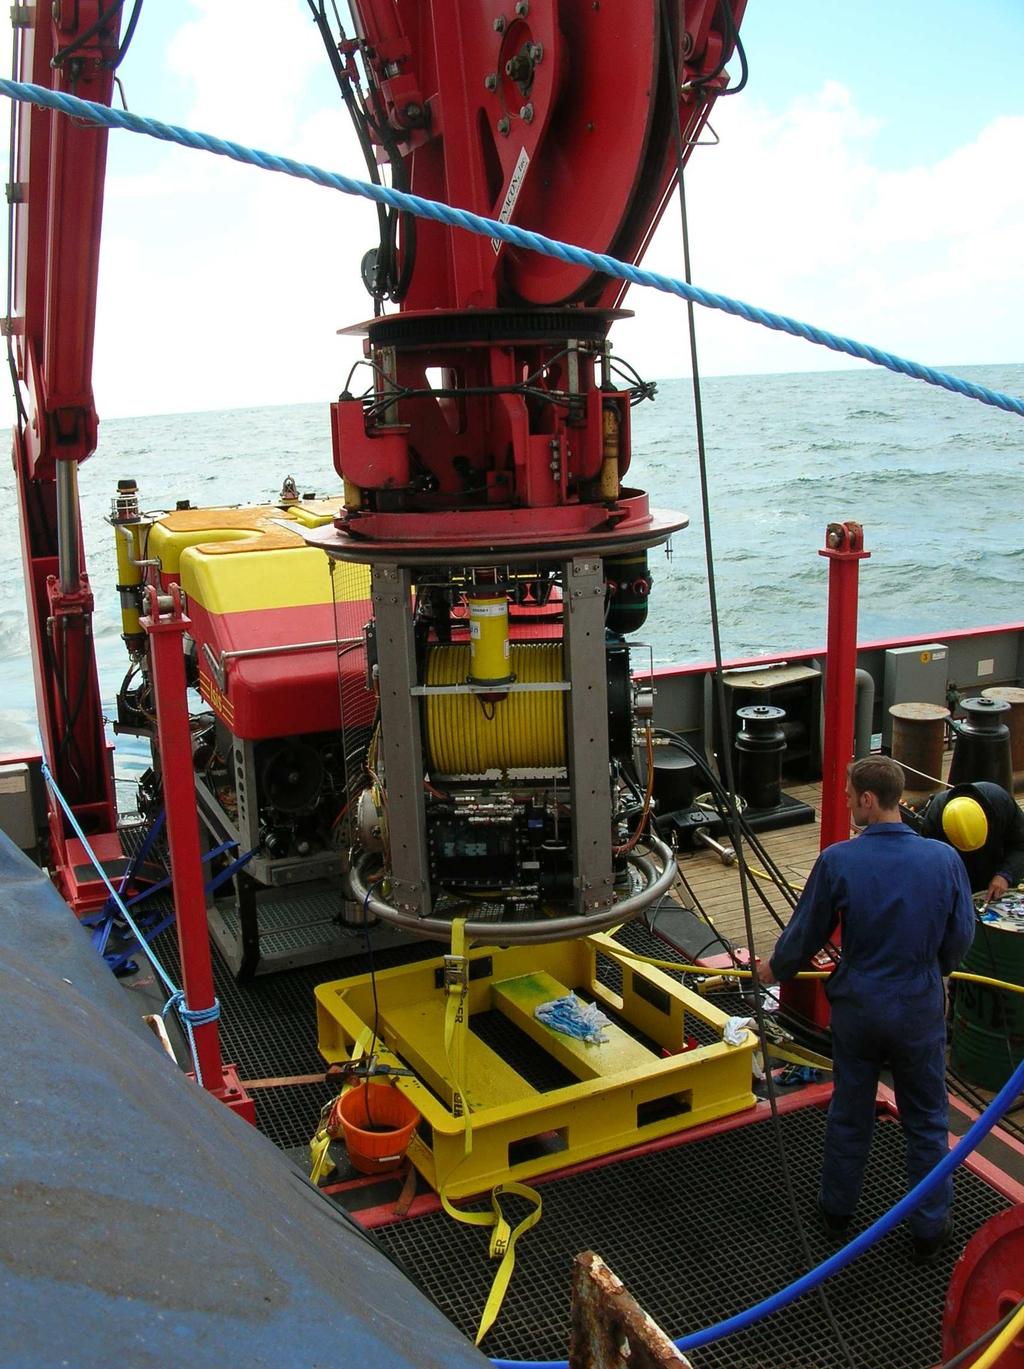 TMS Operations Dive 1 (112m water depth) Calm sea conditions.